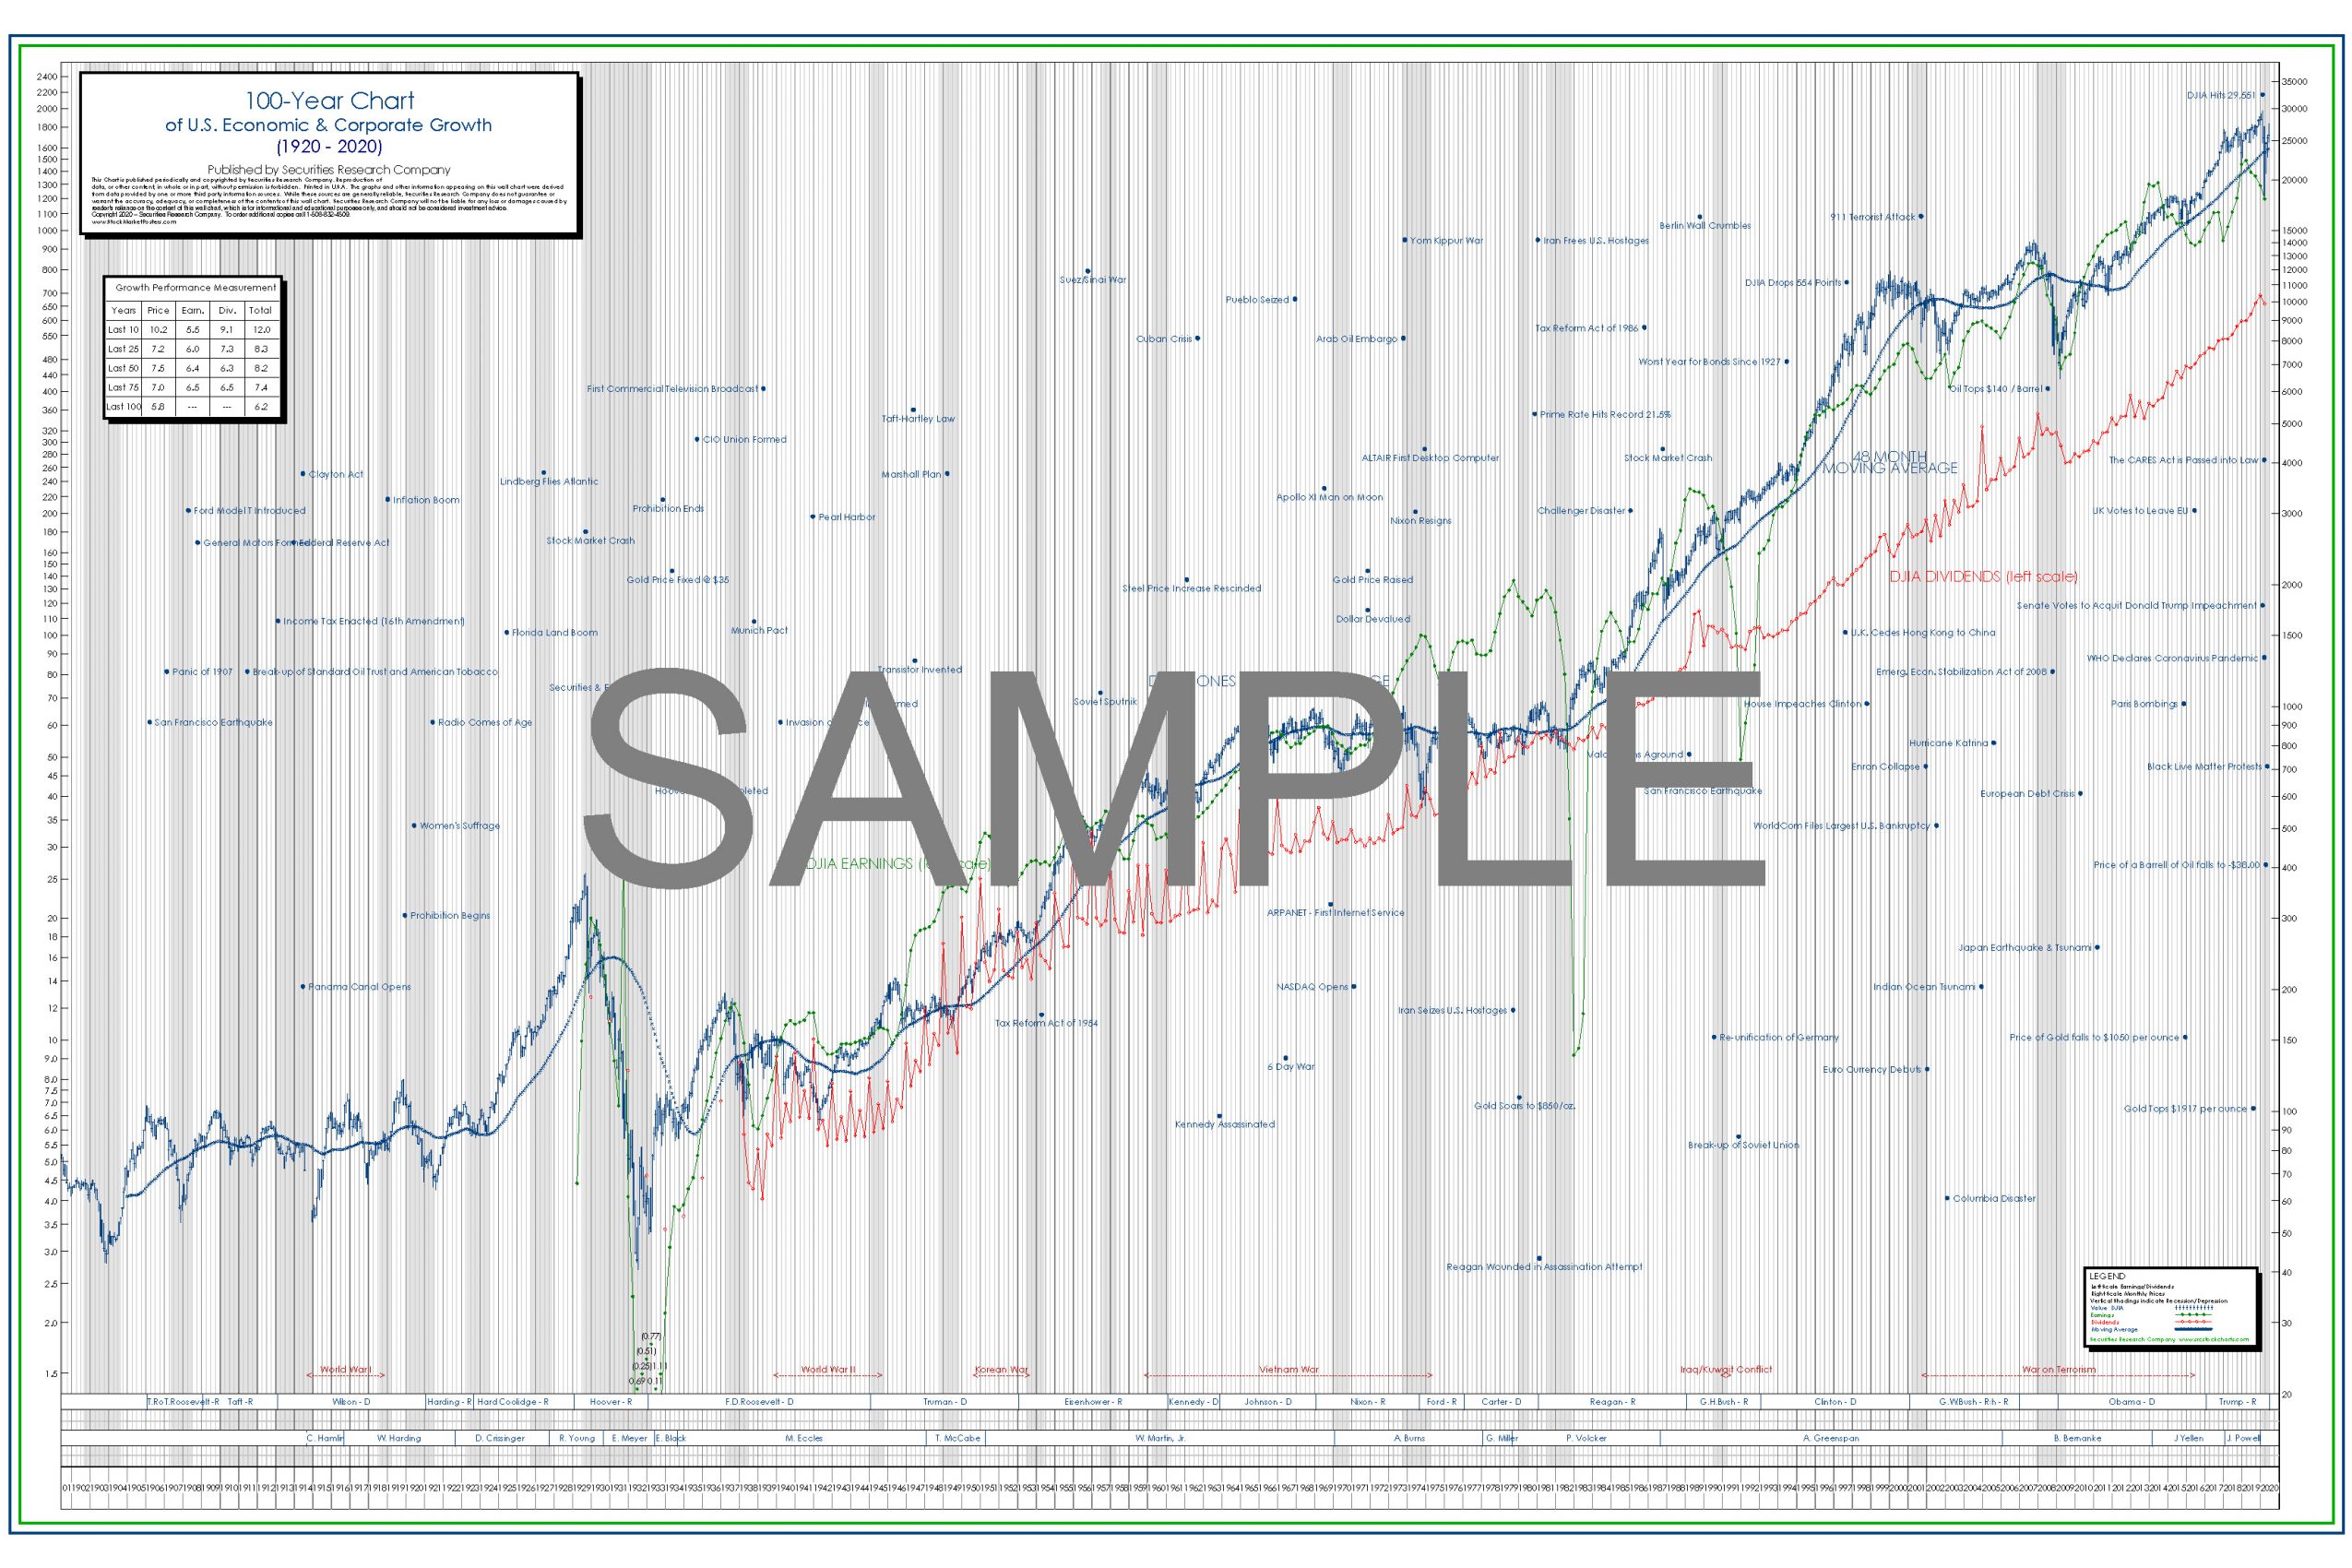 DJIA Stock Chart Poster for the Past 100 Years Securities Research